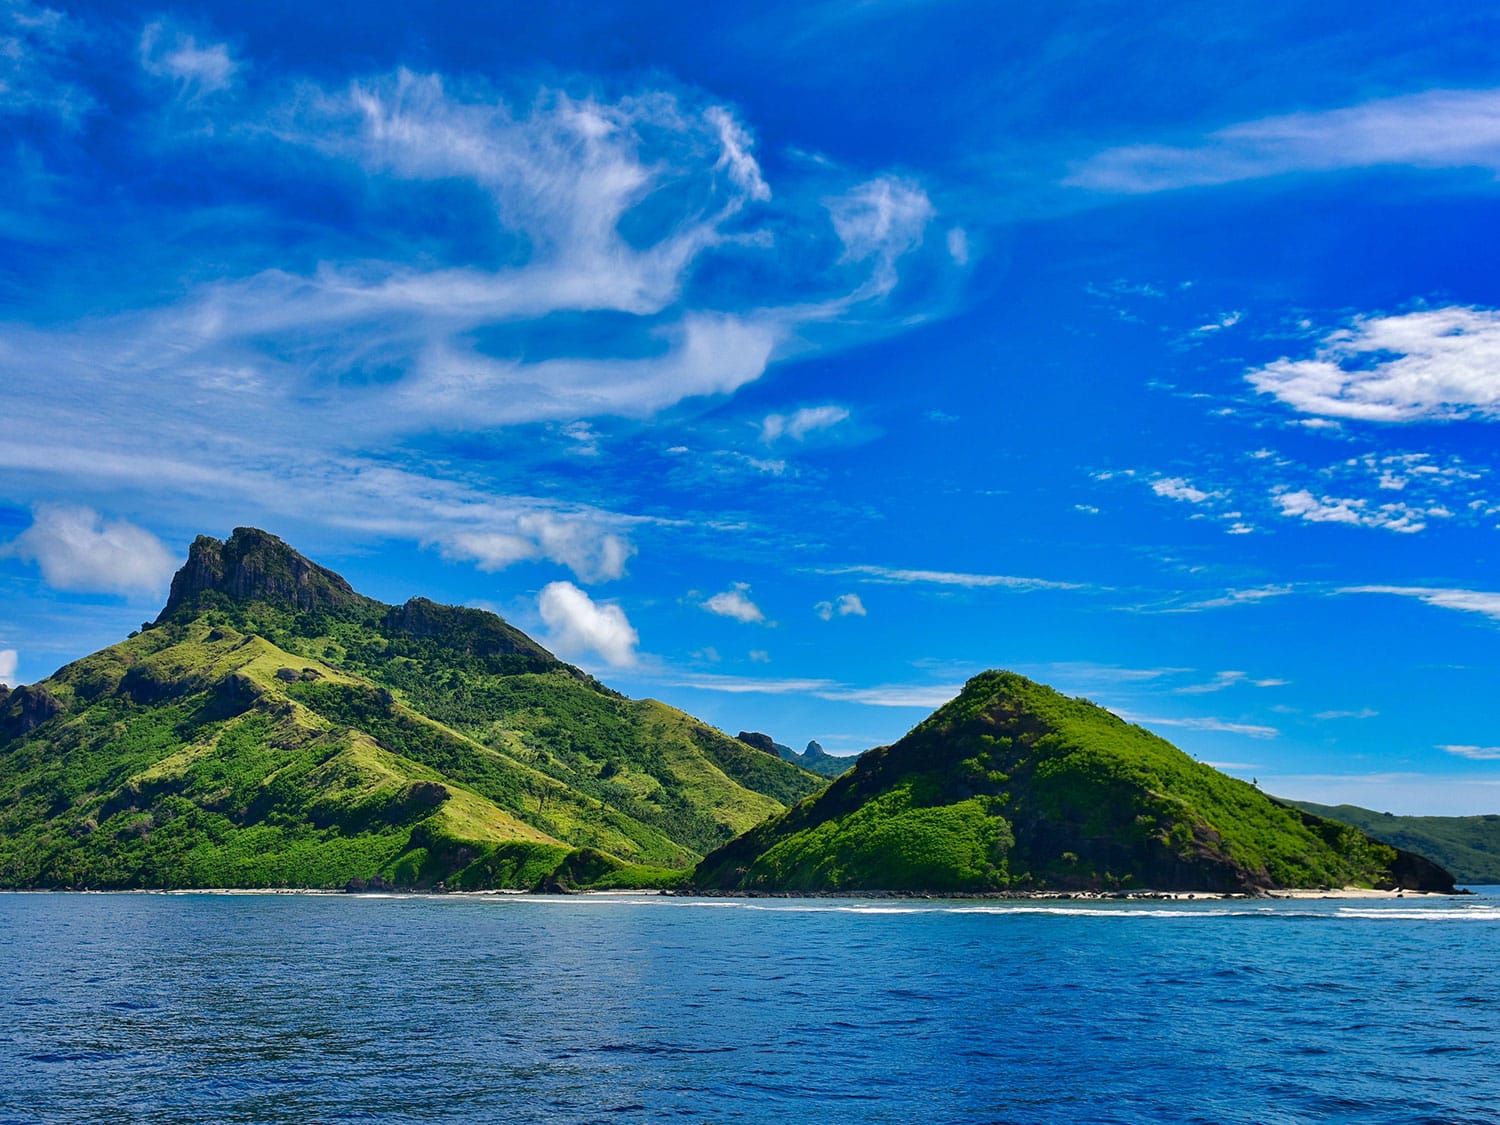 Fiji is full of amazingly different landscapes